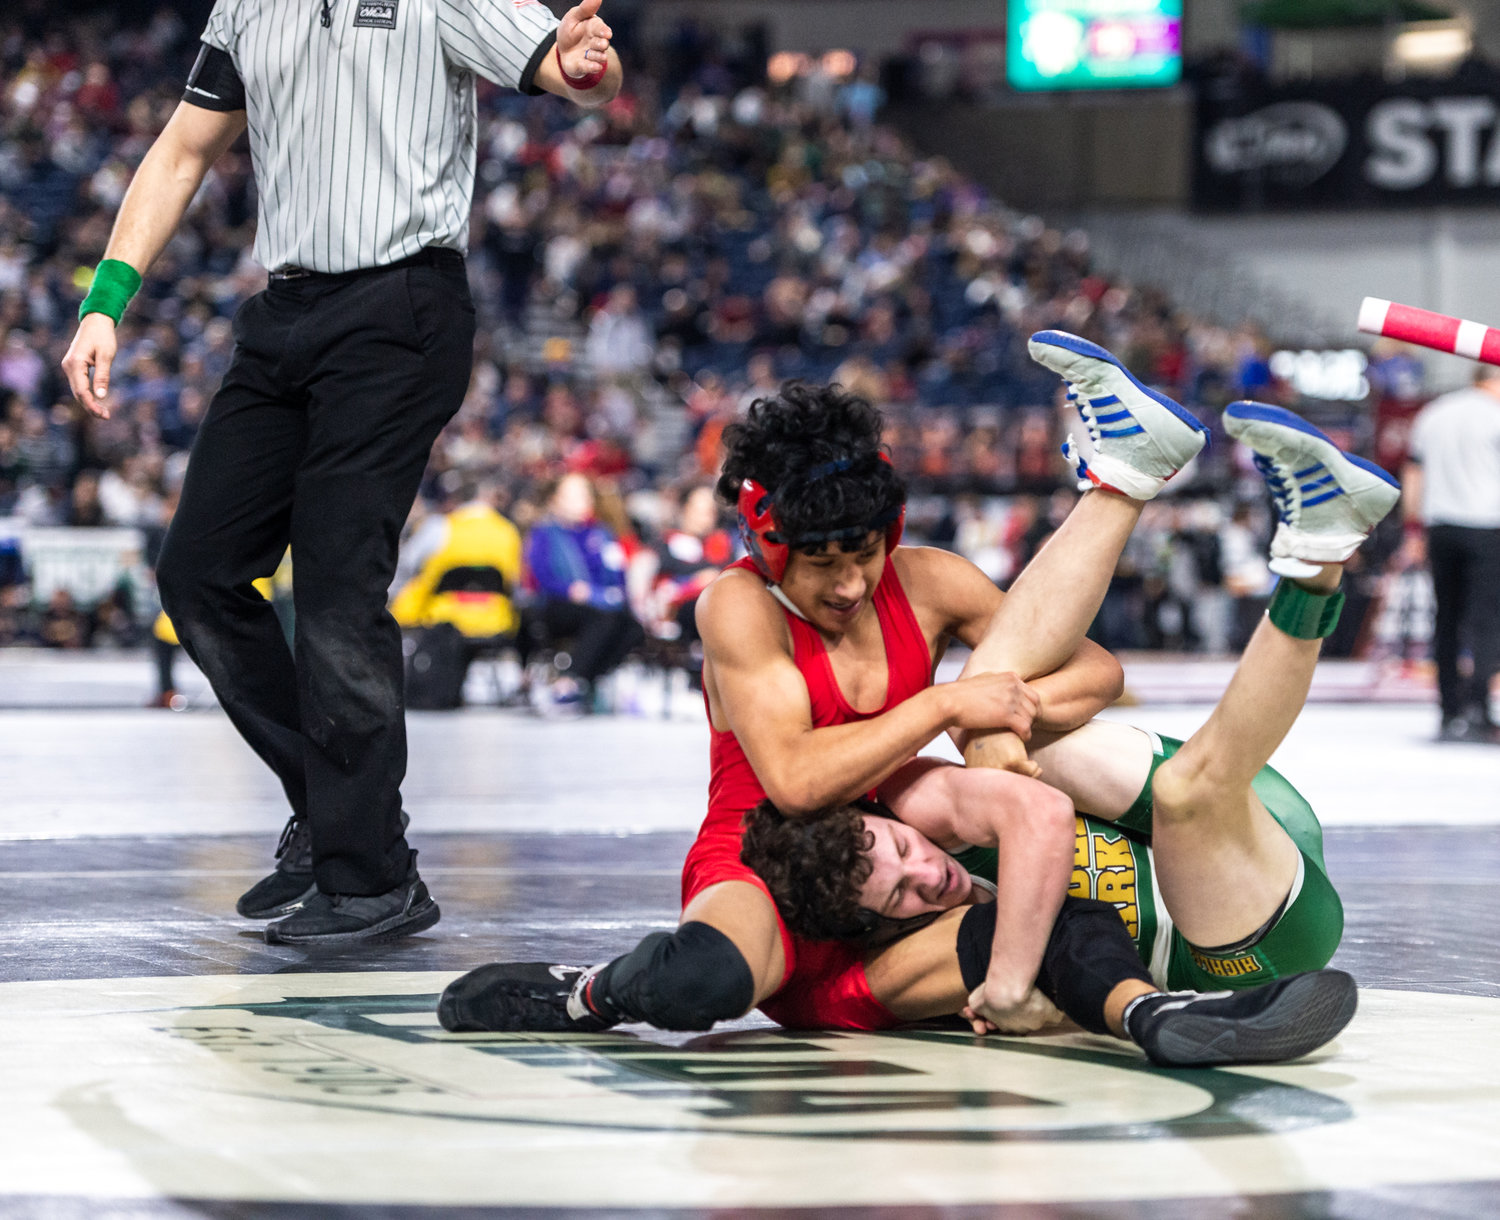 Black Hills’ Roberto Rivera-Jesus, 106 pounds, competes against Shadle Park’s Lucas Horner at Mat Classic XXXIV on Friday, February 17, 2023, at the Tacoma Dome. (Joshua Hart/For The Chronicle)